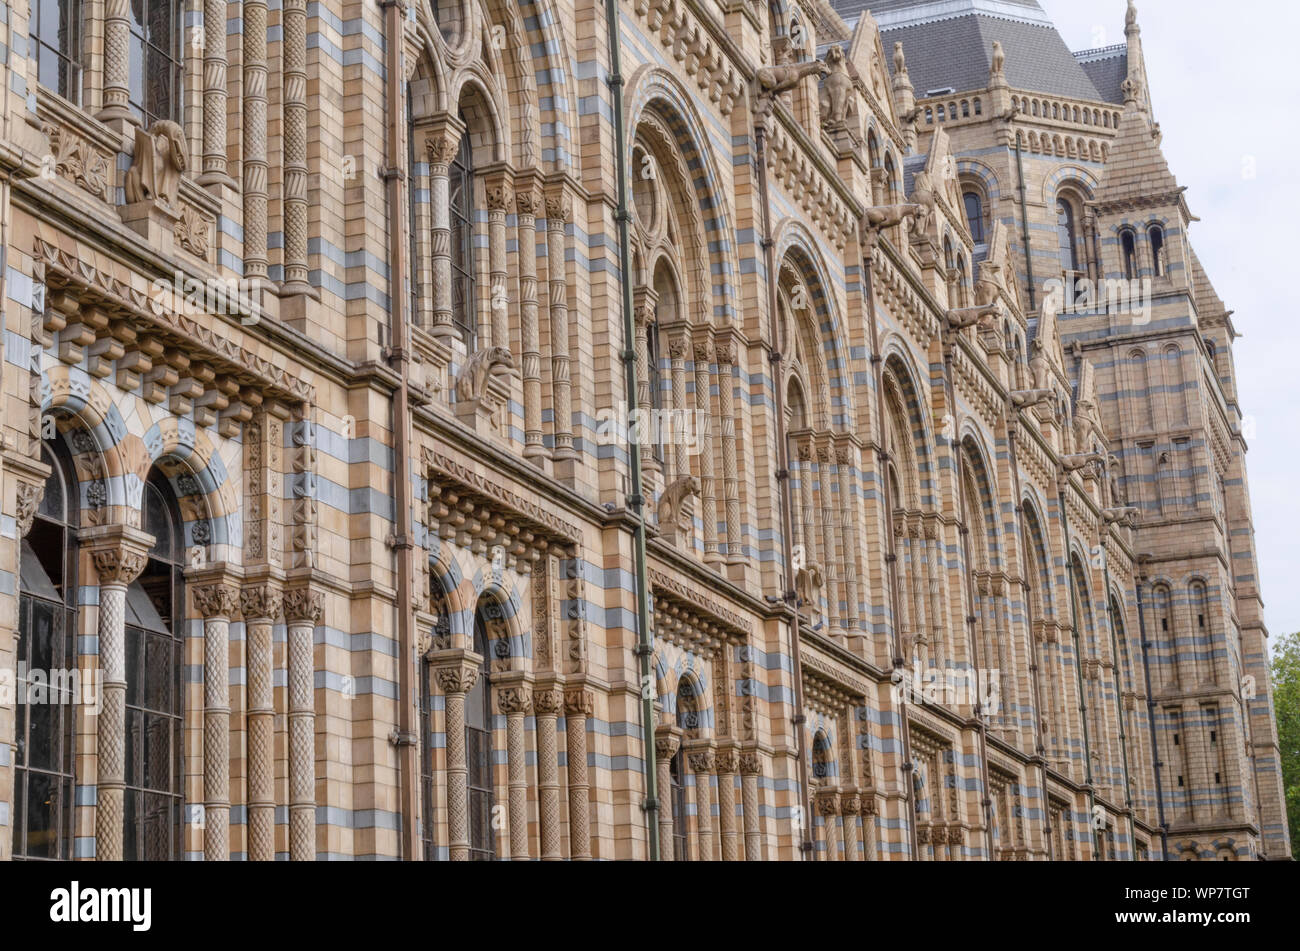 Exterior of Natural History Museum, Lonon. Stock Photo